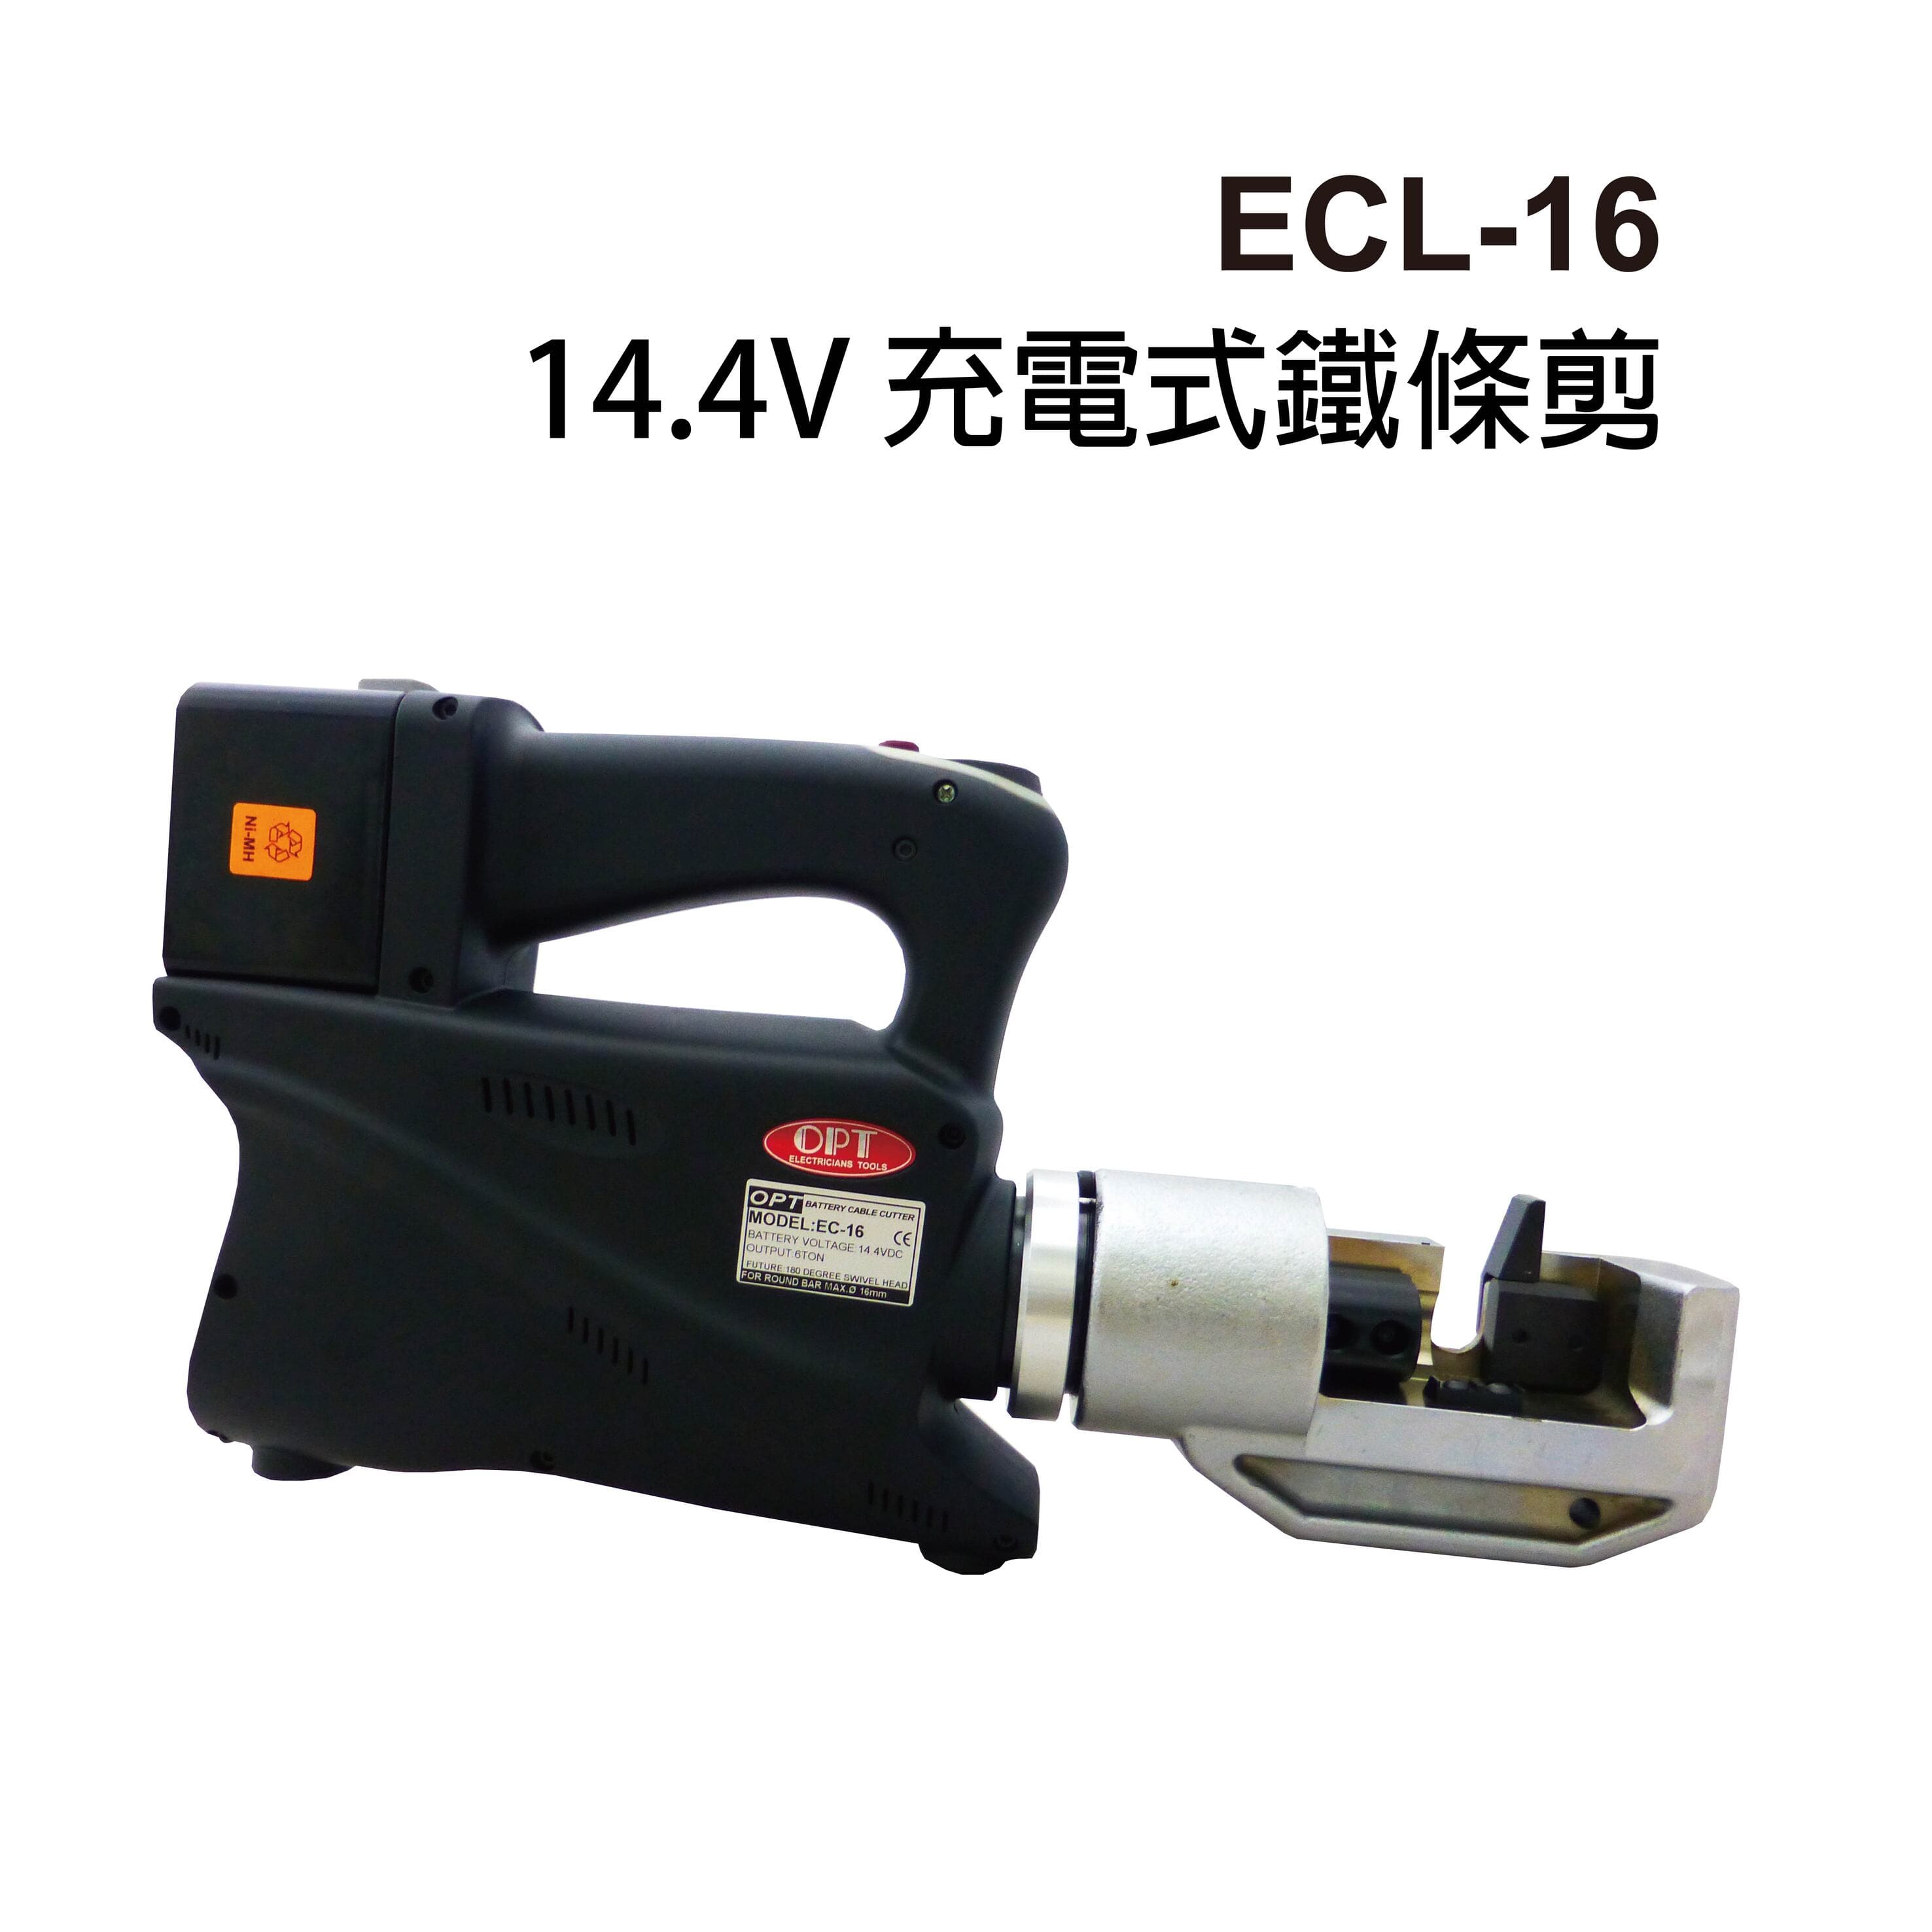 ECL-16 CORDLESS HYDRAULIC CABLE CUTTERS